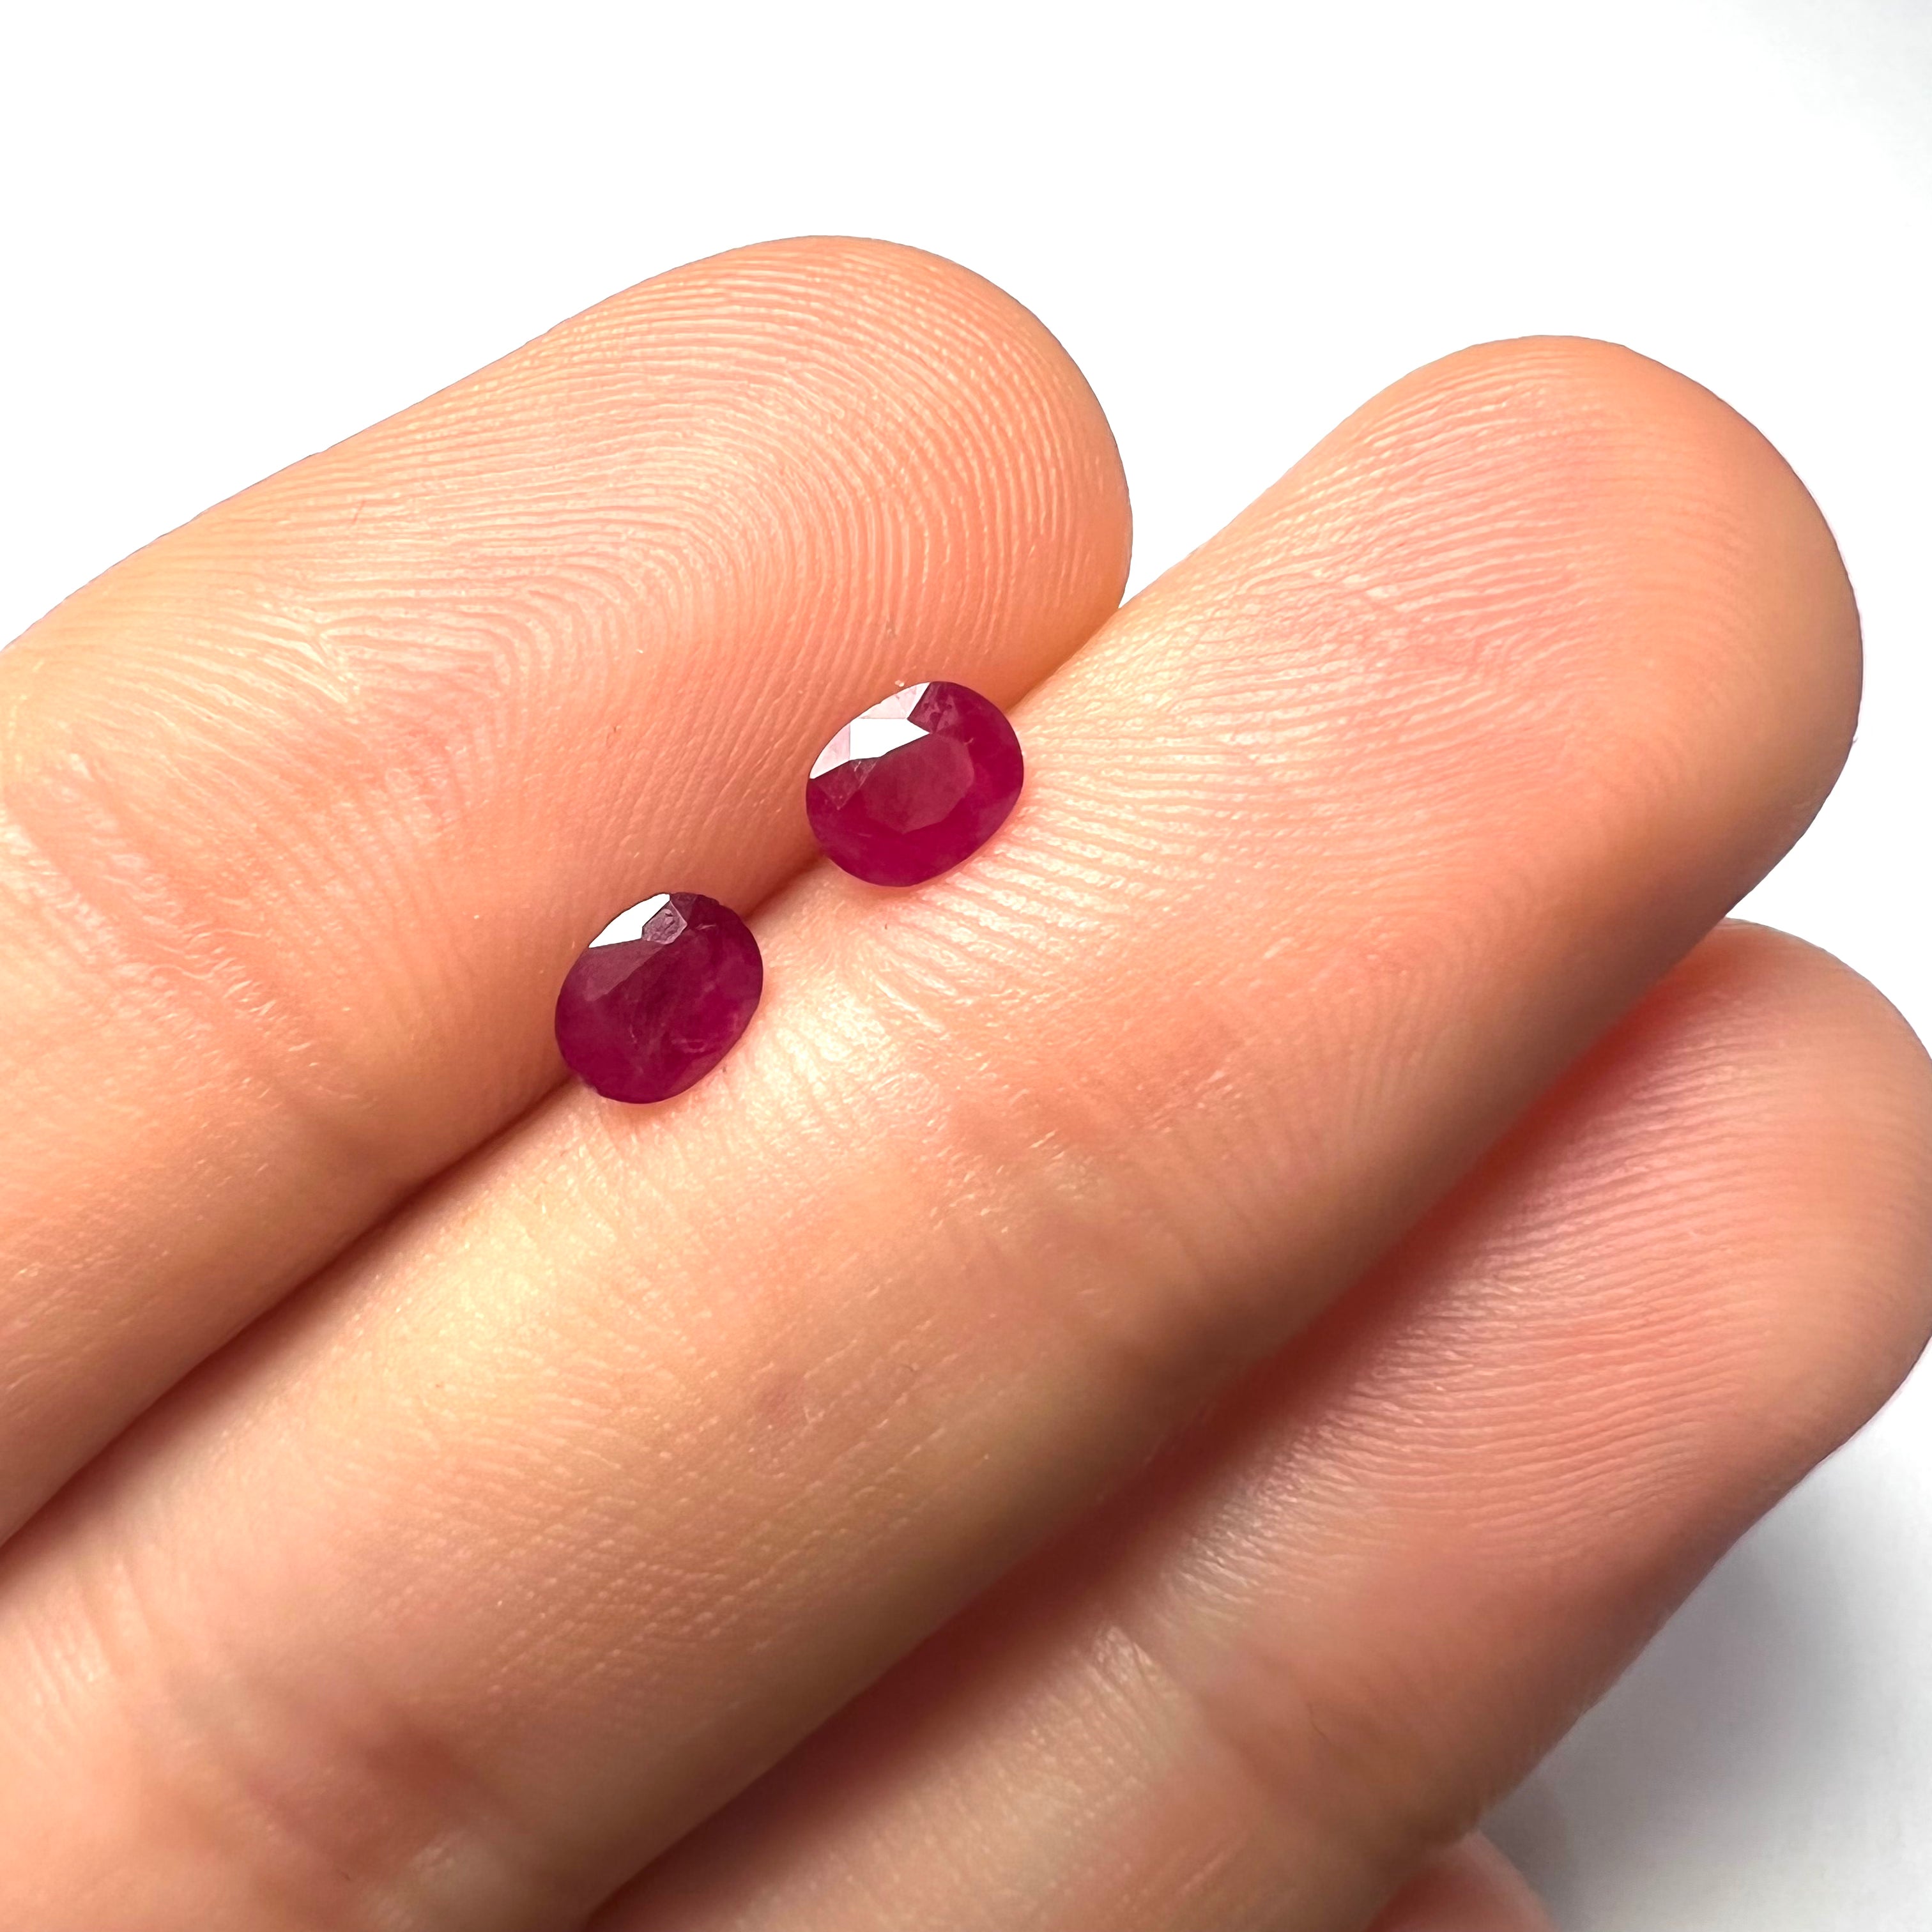 .75CT Pair of Natural Oval Loose Ruby 5x4x1.5mm Earth mined Gemstone